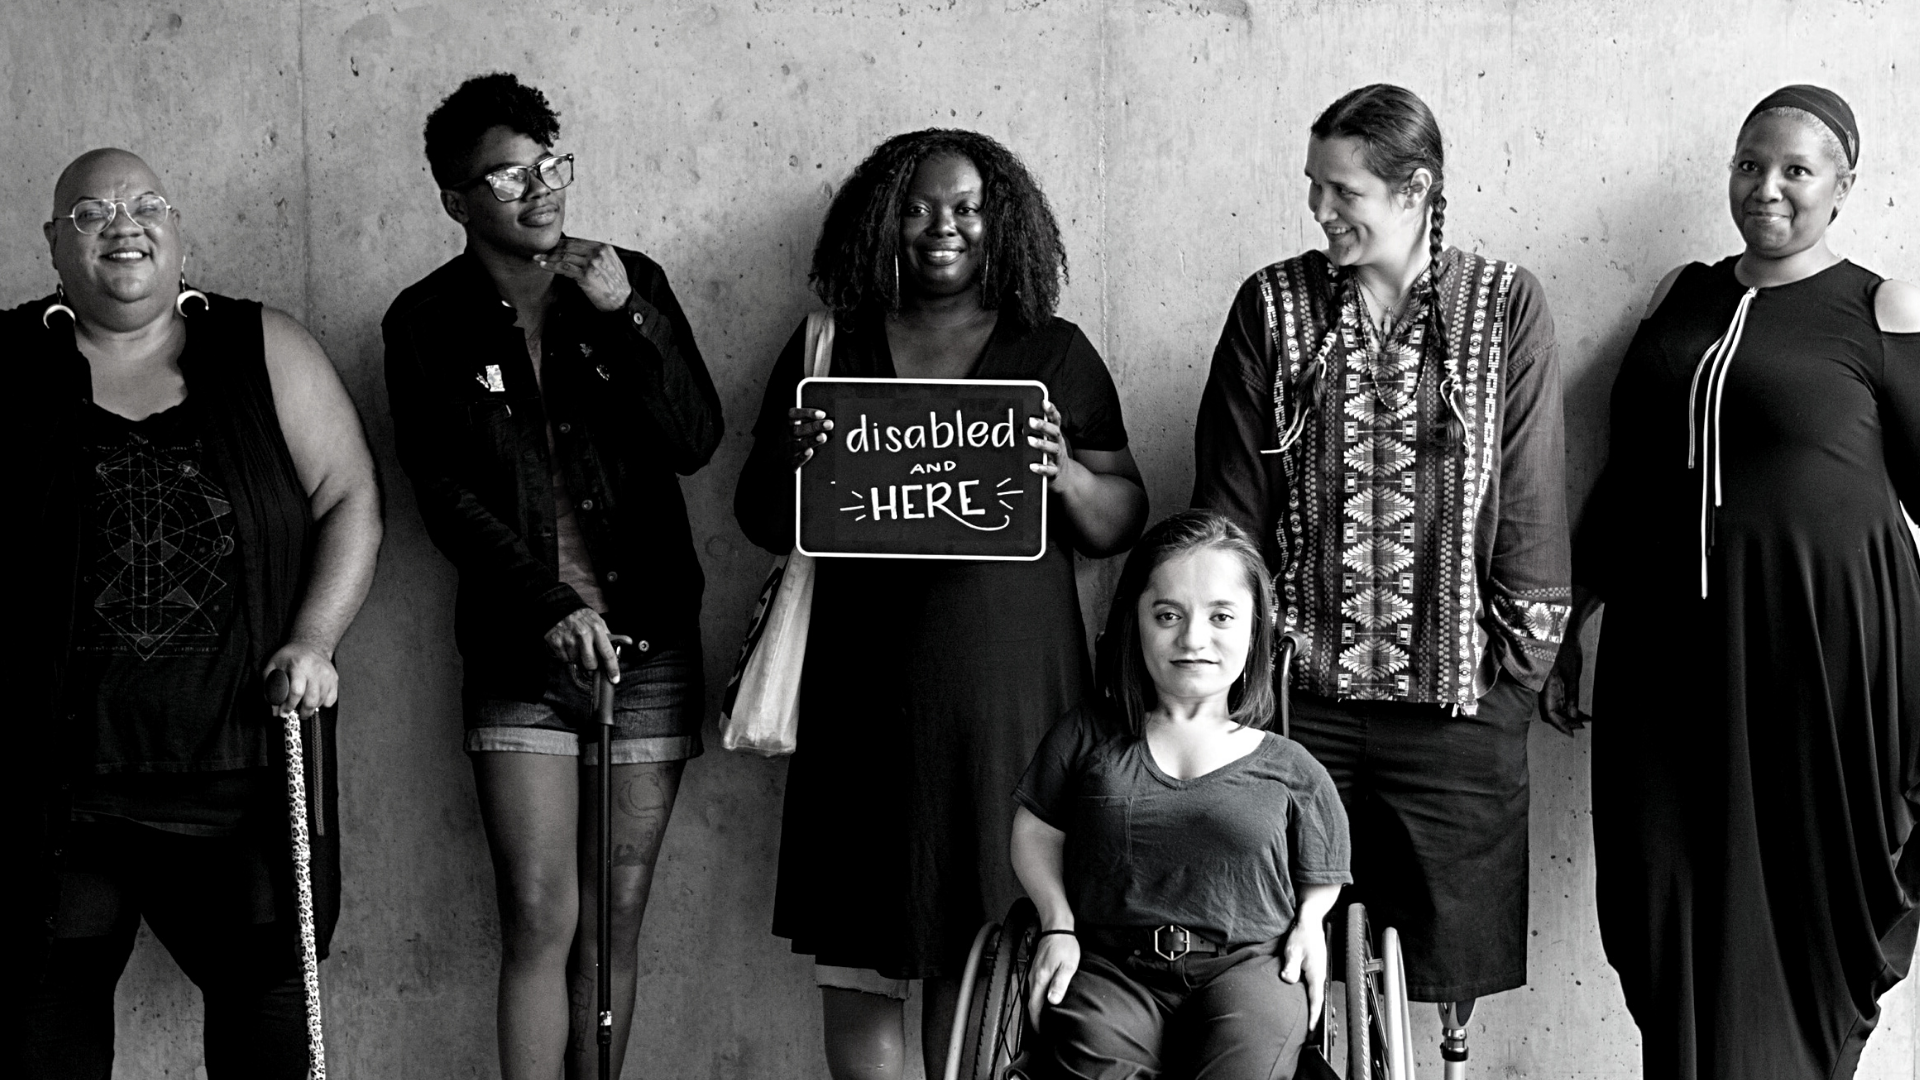 Six people of colour and with disability smile and pose in front of a concrete wall. Five people stand in the back, with the woman in the center holding up a chalkboard sign reading "disabled and here." A person in a wheelchair sits in front.